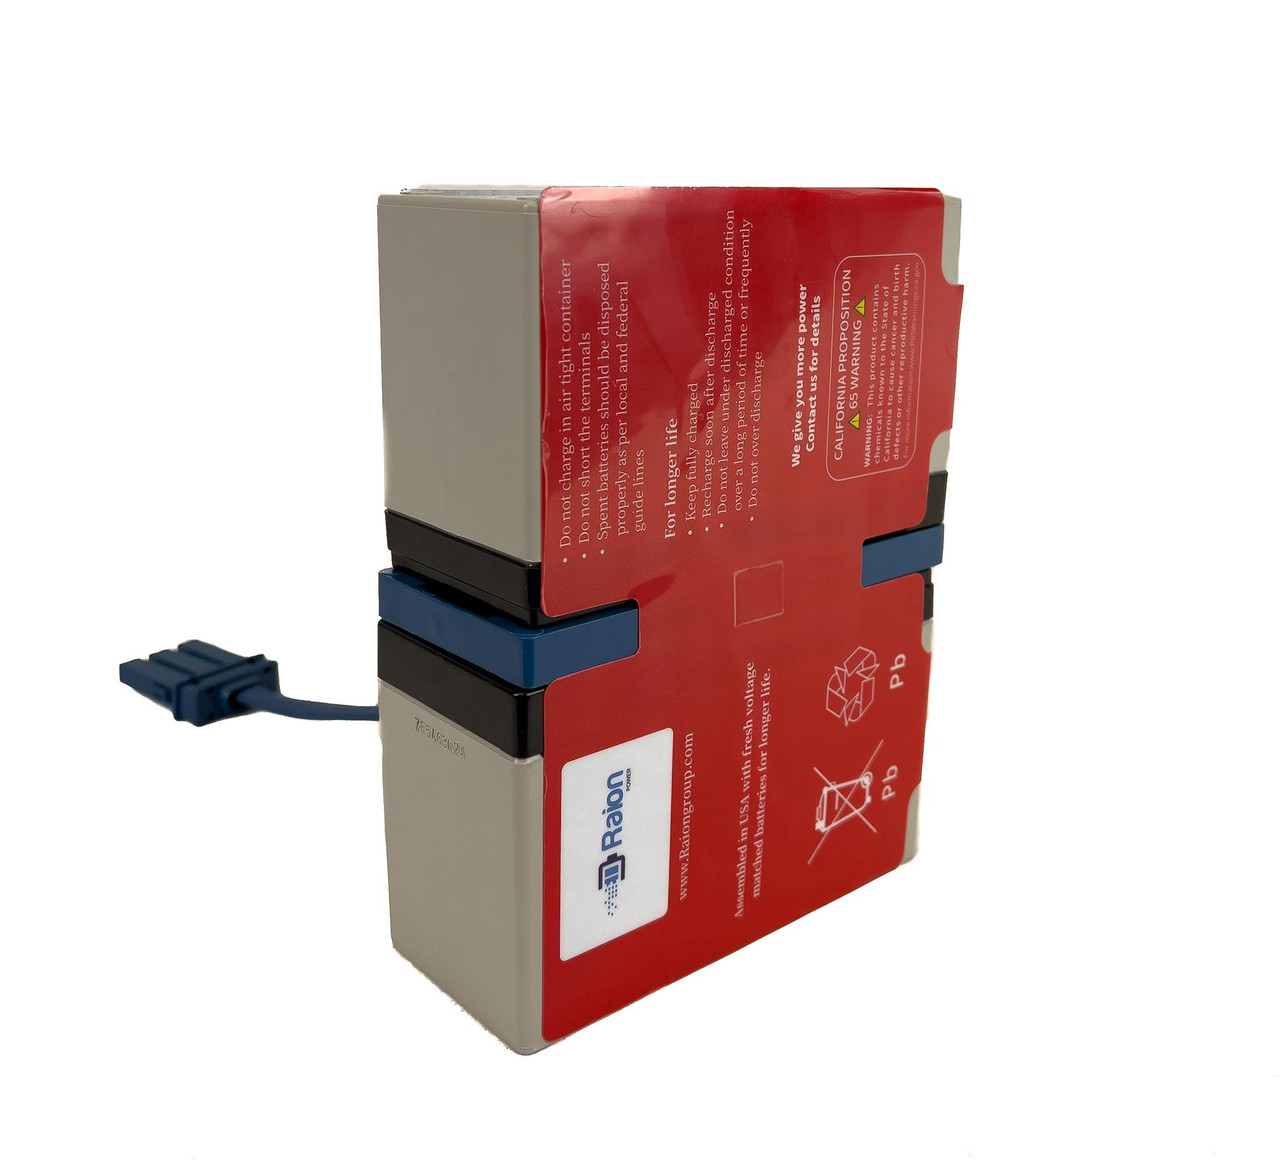 Raion Power RG-RBC32 Replacement High Rate Battery Cartridge for APC Back-UPS RS 800VA RS800